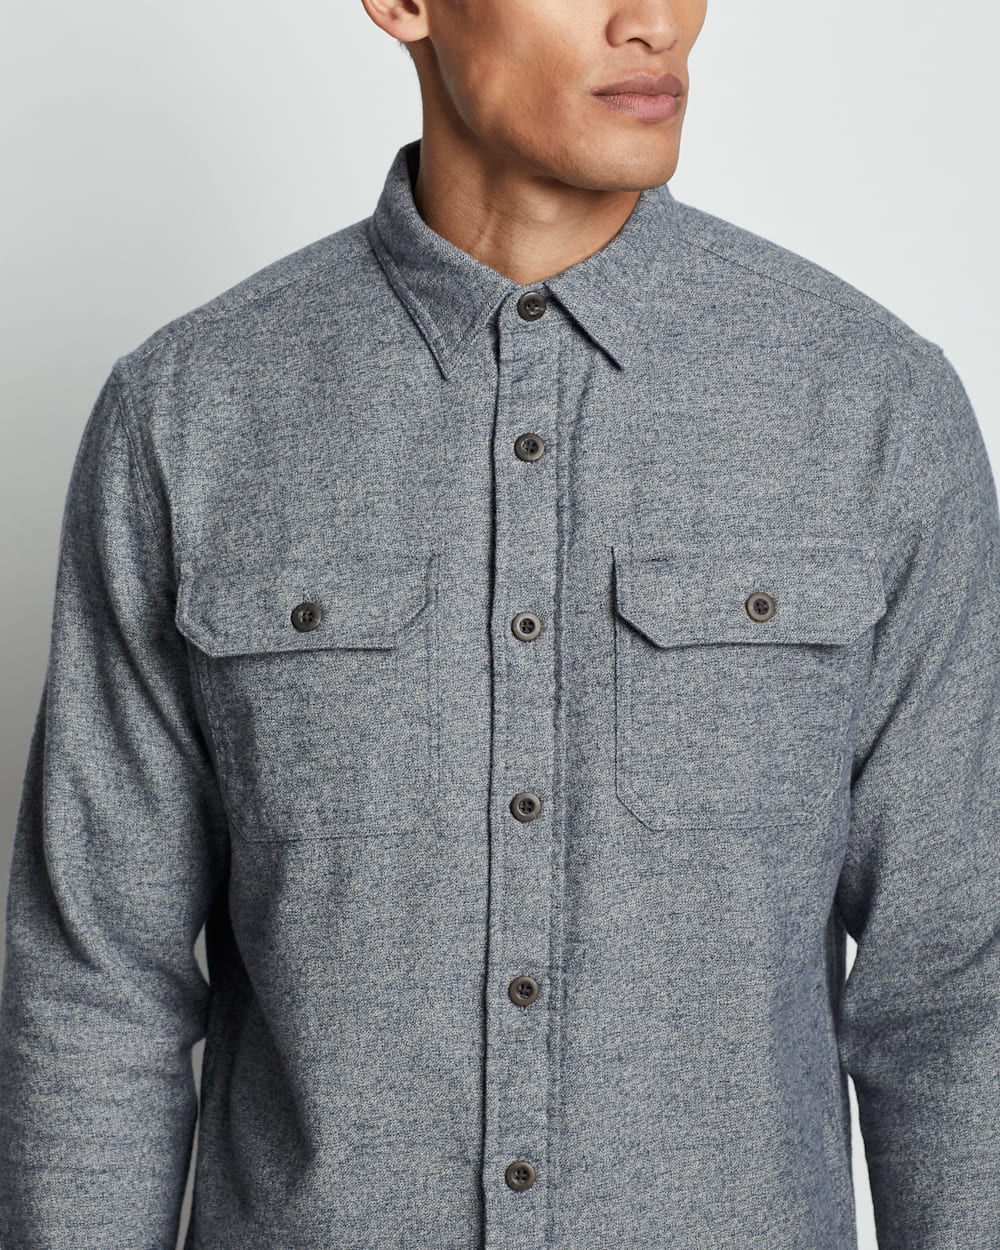 ALTERNATE VIEW OF MEN'S BURNSIDE DOUBLE-BRUSHED FLANNEL SHIRT IN CLASSIC NAVY HEATHER image number 4